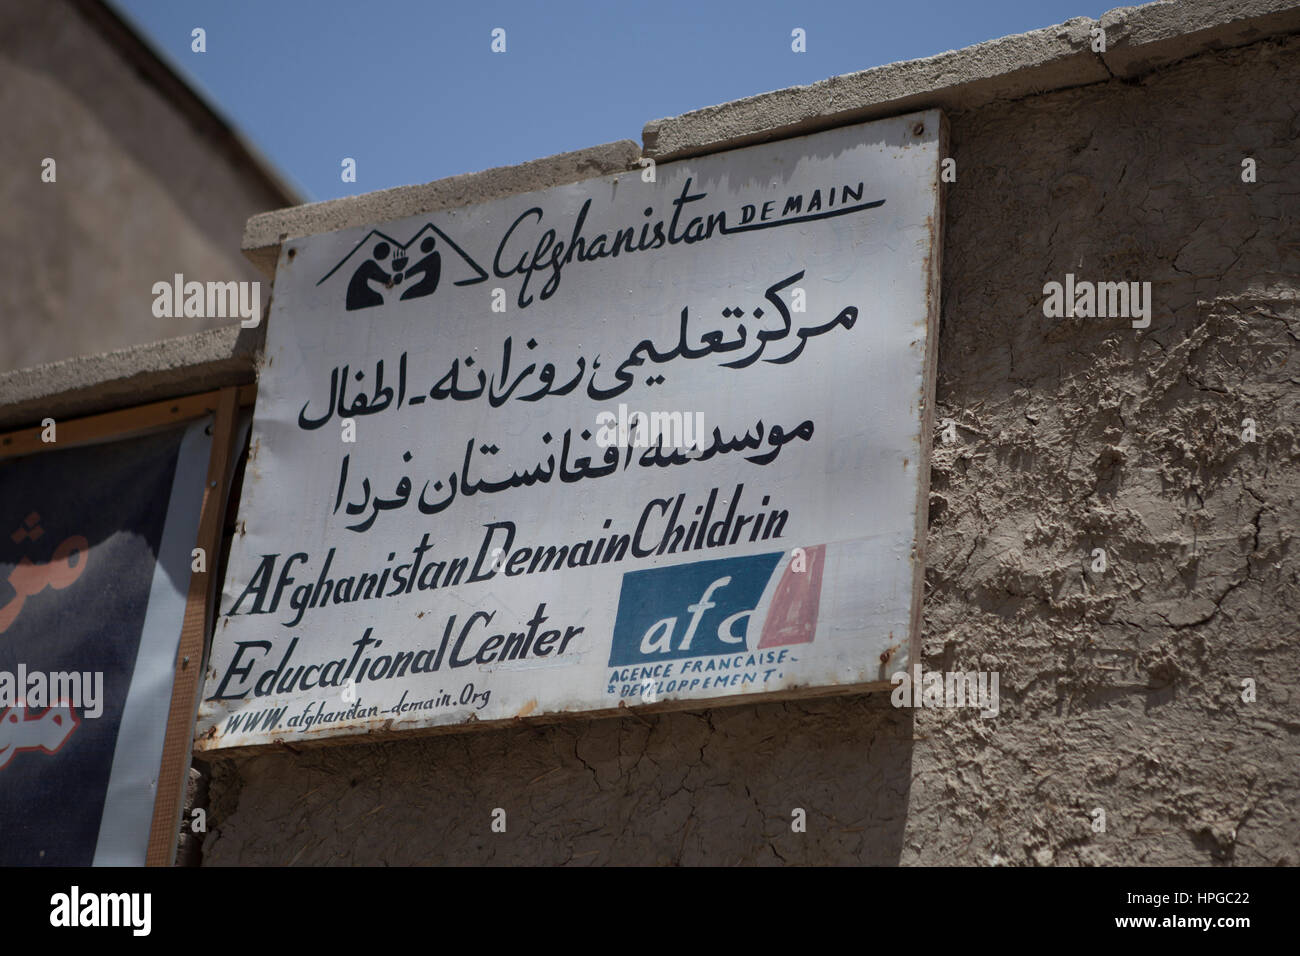 Sign indicating the building belonging to the NGO Afghanistan Demain Stock Photo